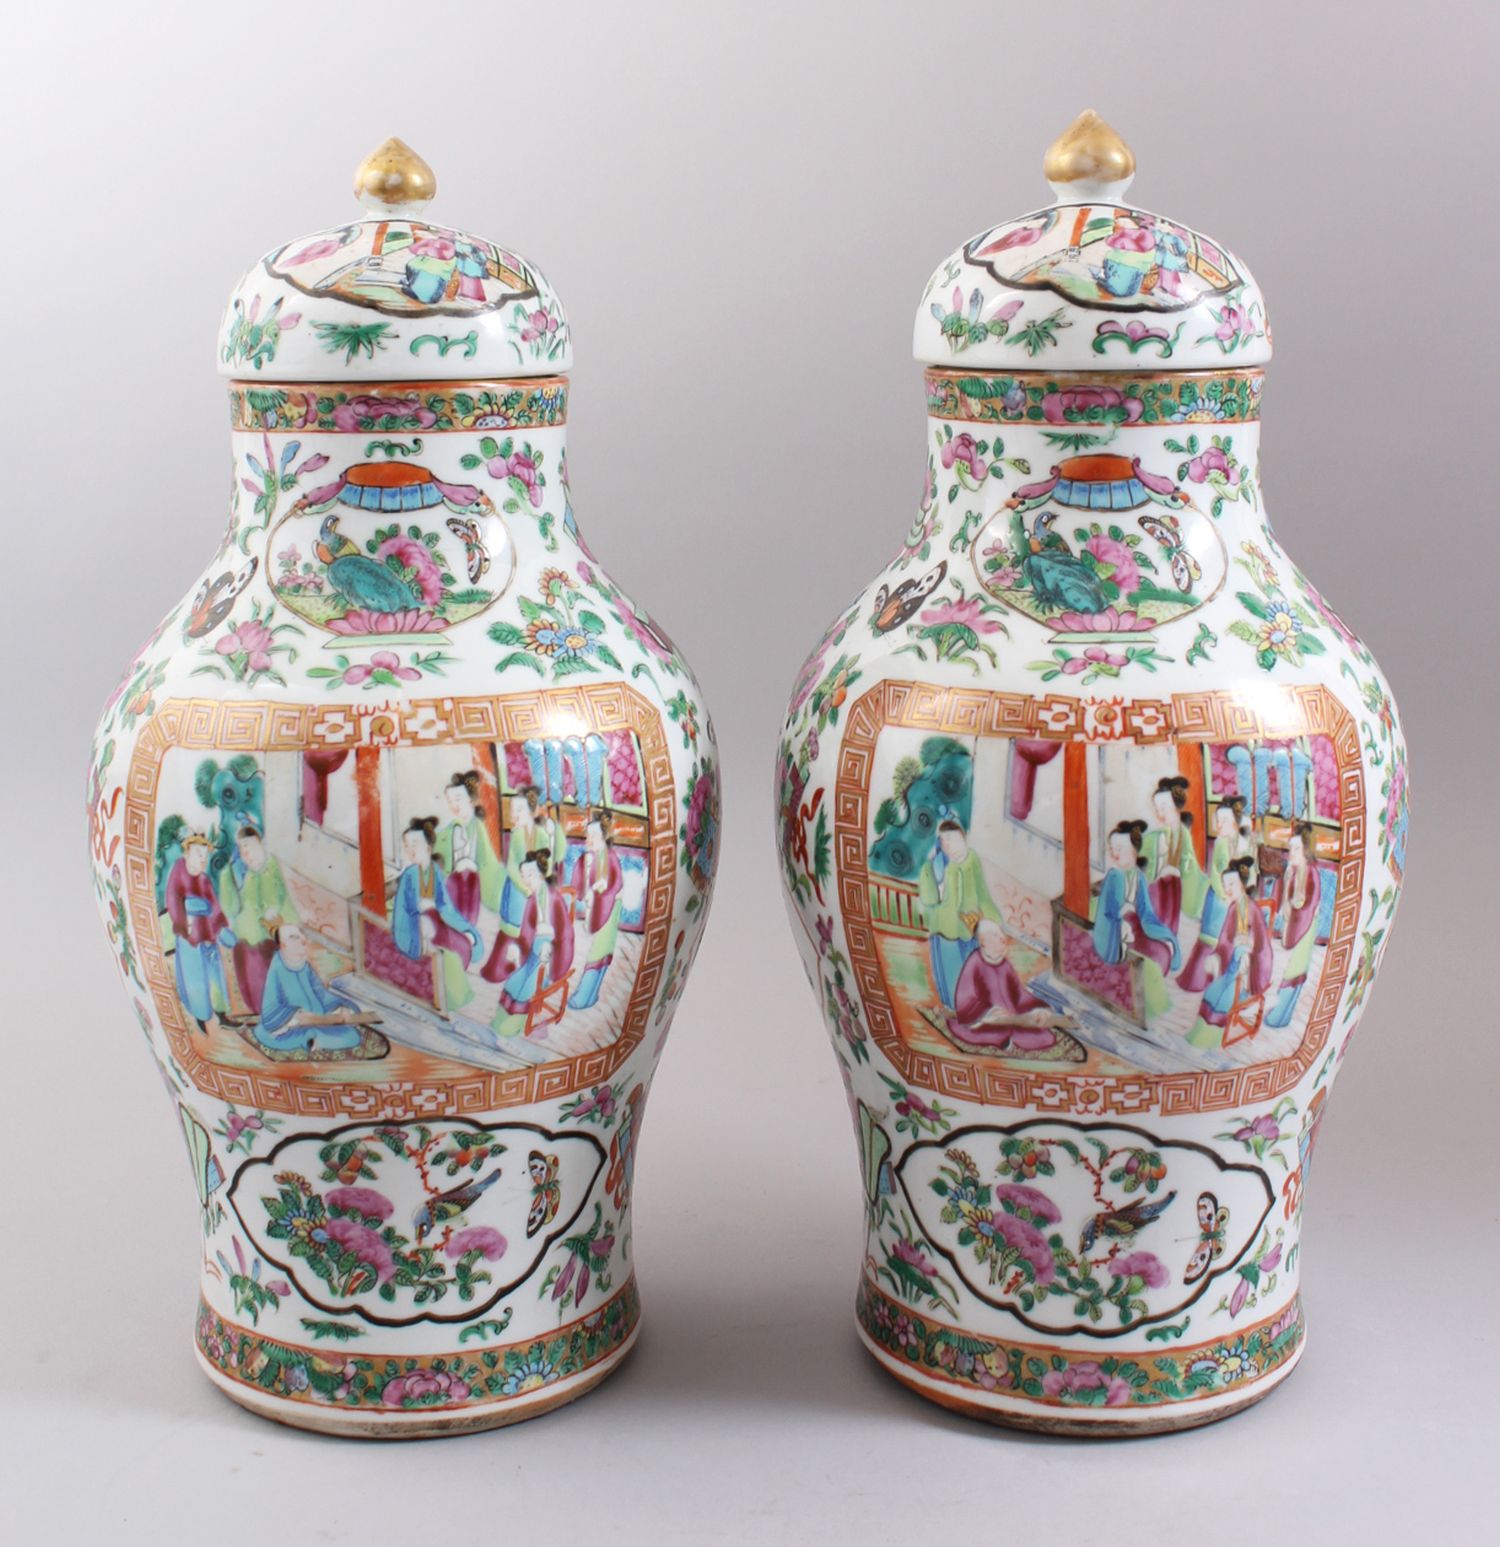 A GOOD PAIR OF 19TH CENTURY CHINESE CANTONESE VASES & COVERS, decorated with panels of birds and